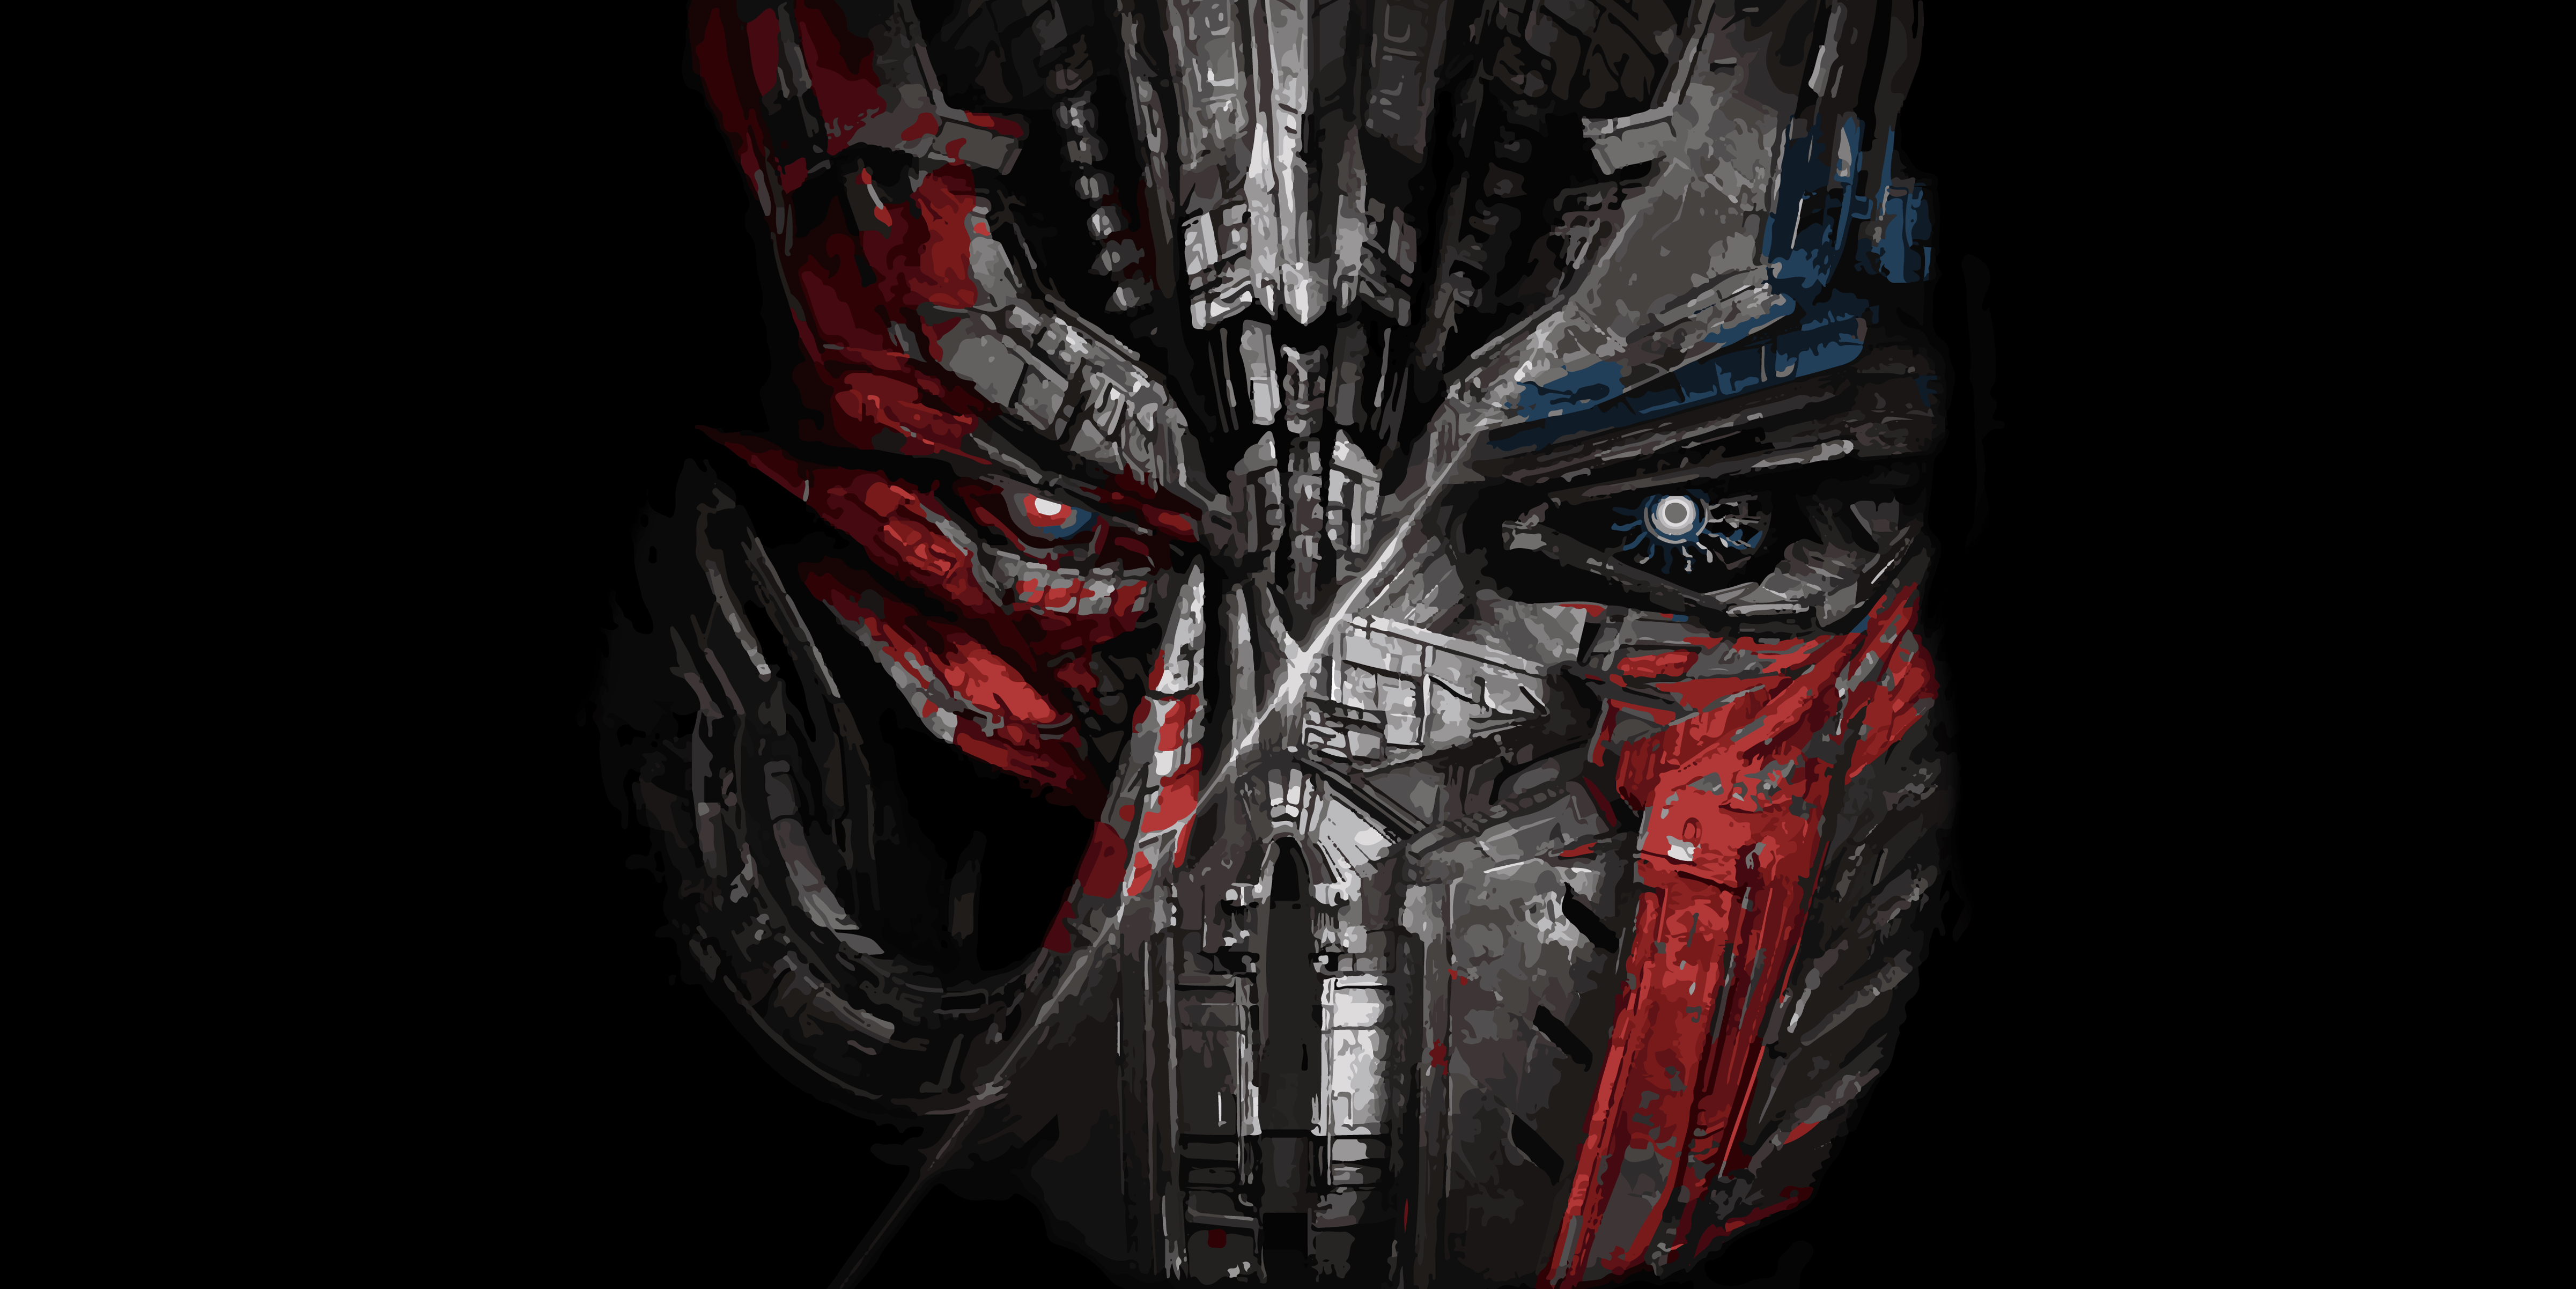 Transformers: The Last Knight HD Wallpaper. Background